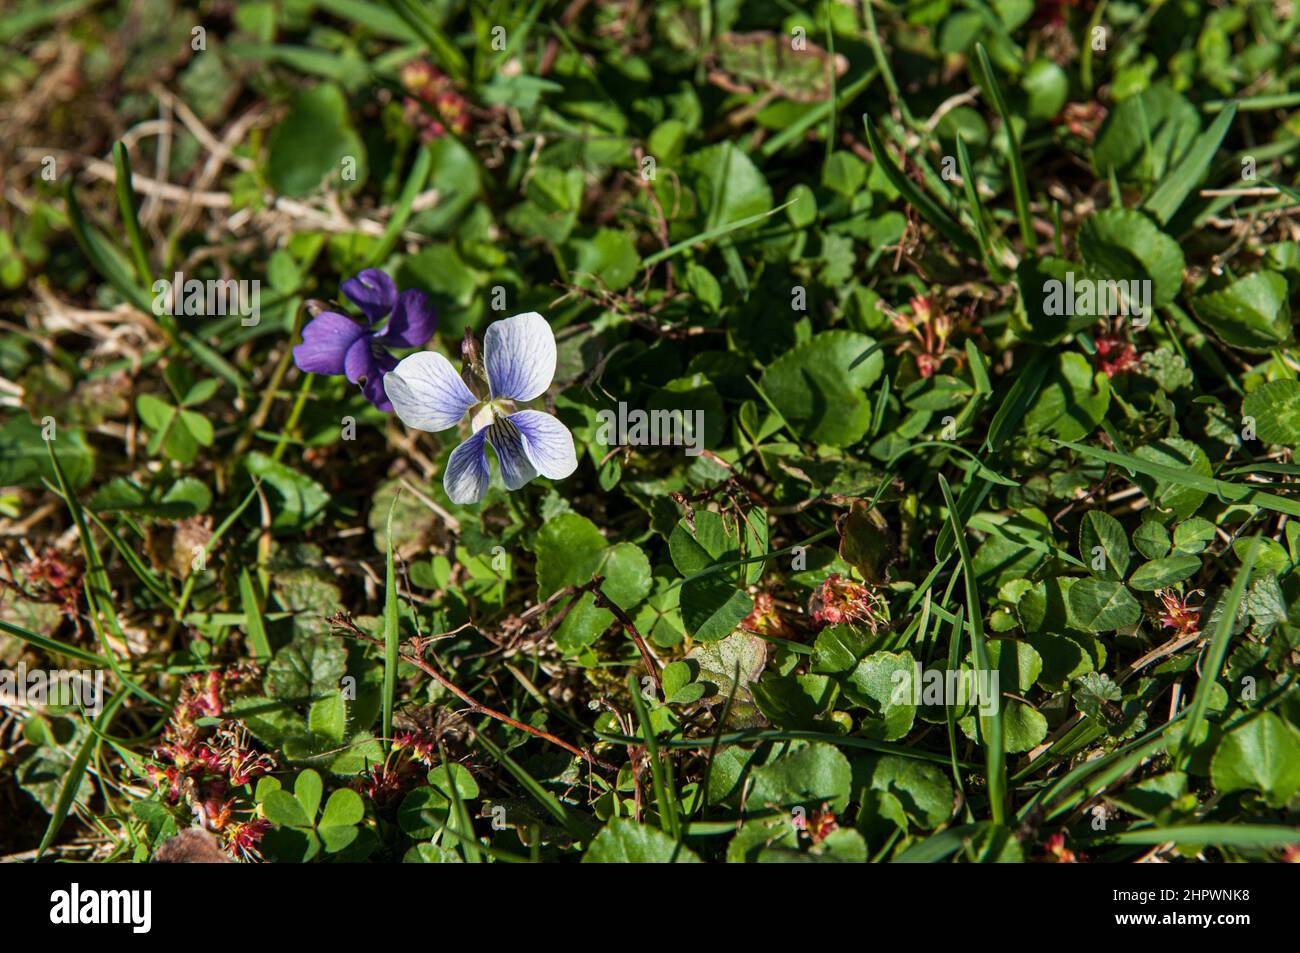 Two color morphs of the Common Blue Violet( Viola sororia) grow in a back yard in Annandale, Virginia. Stock Photo